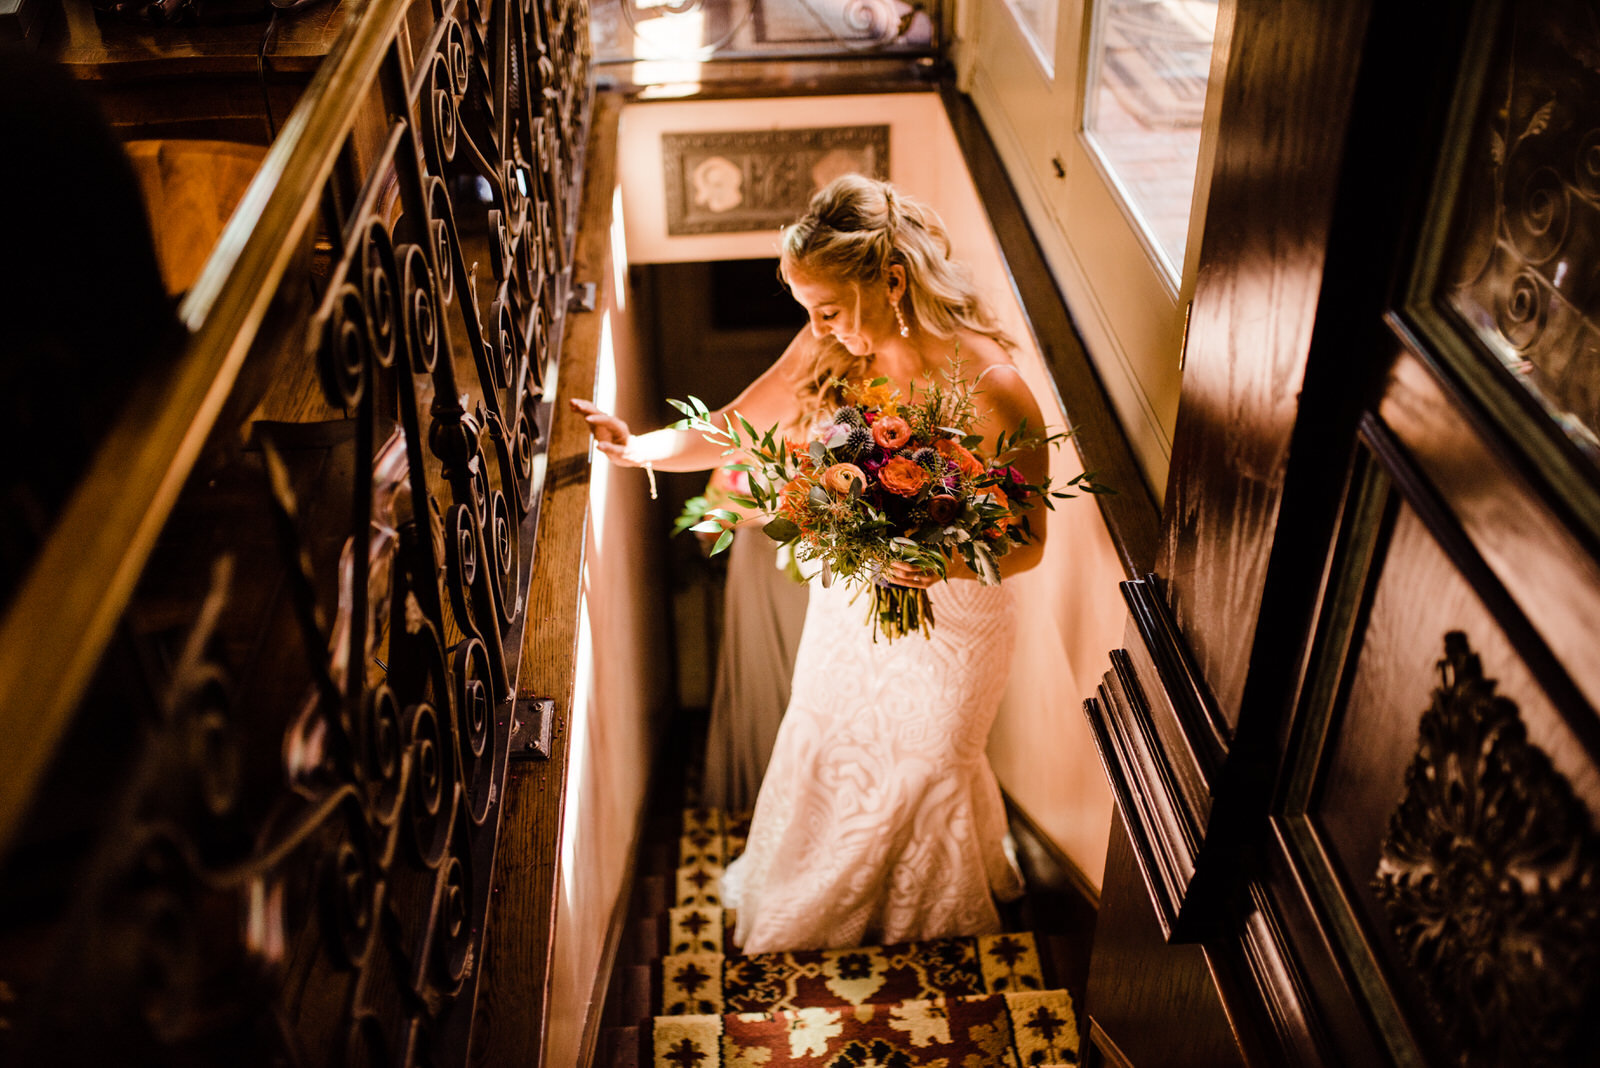 Bride in Hayley Paige wedding dress with Wildflora Design bouquet walking at Houdini Estate